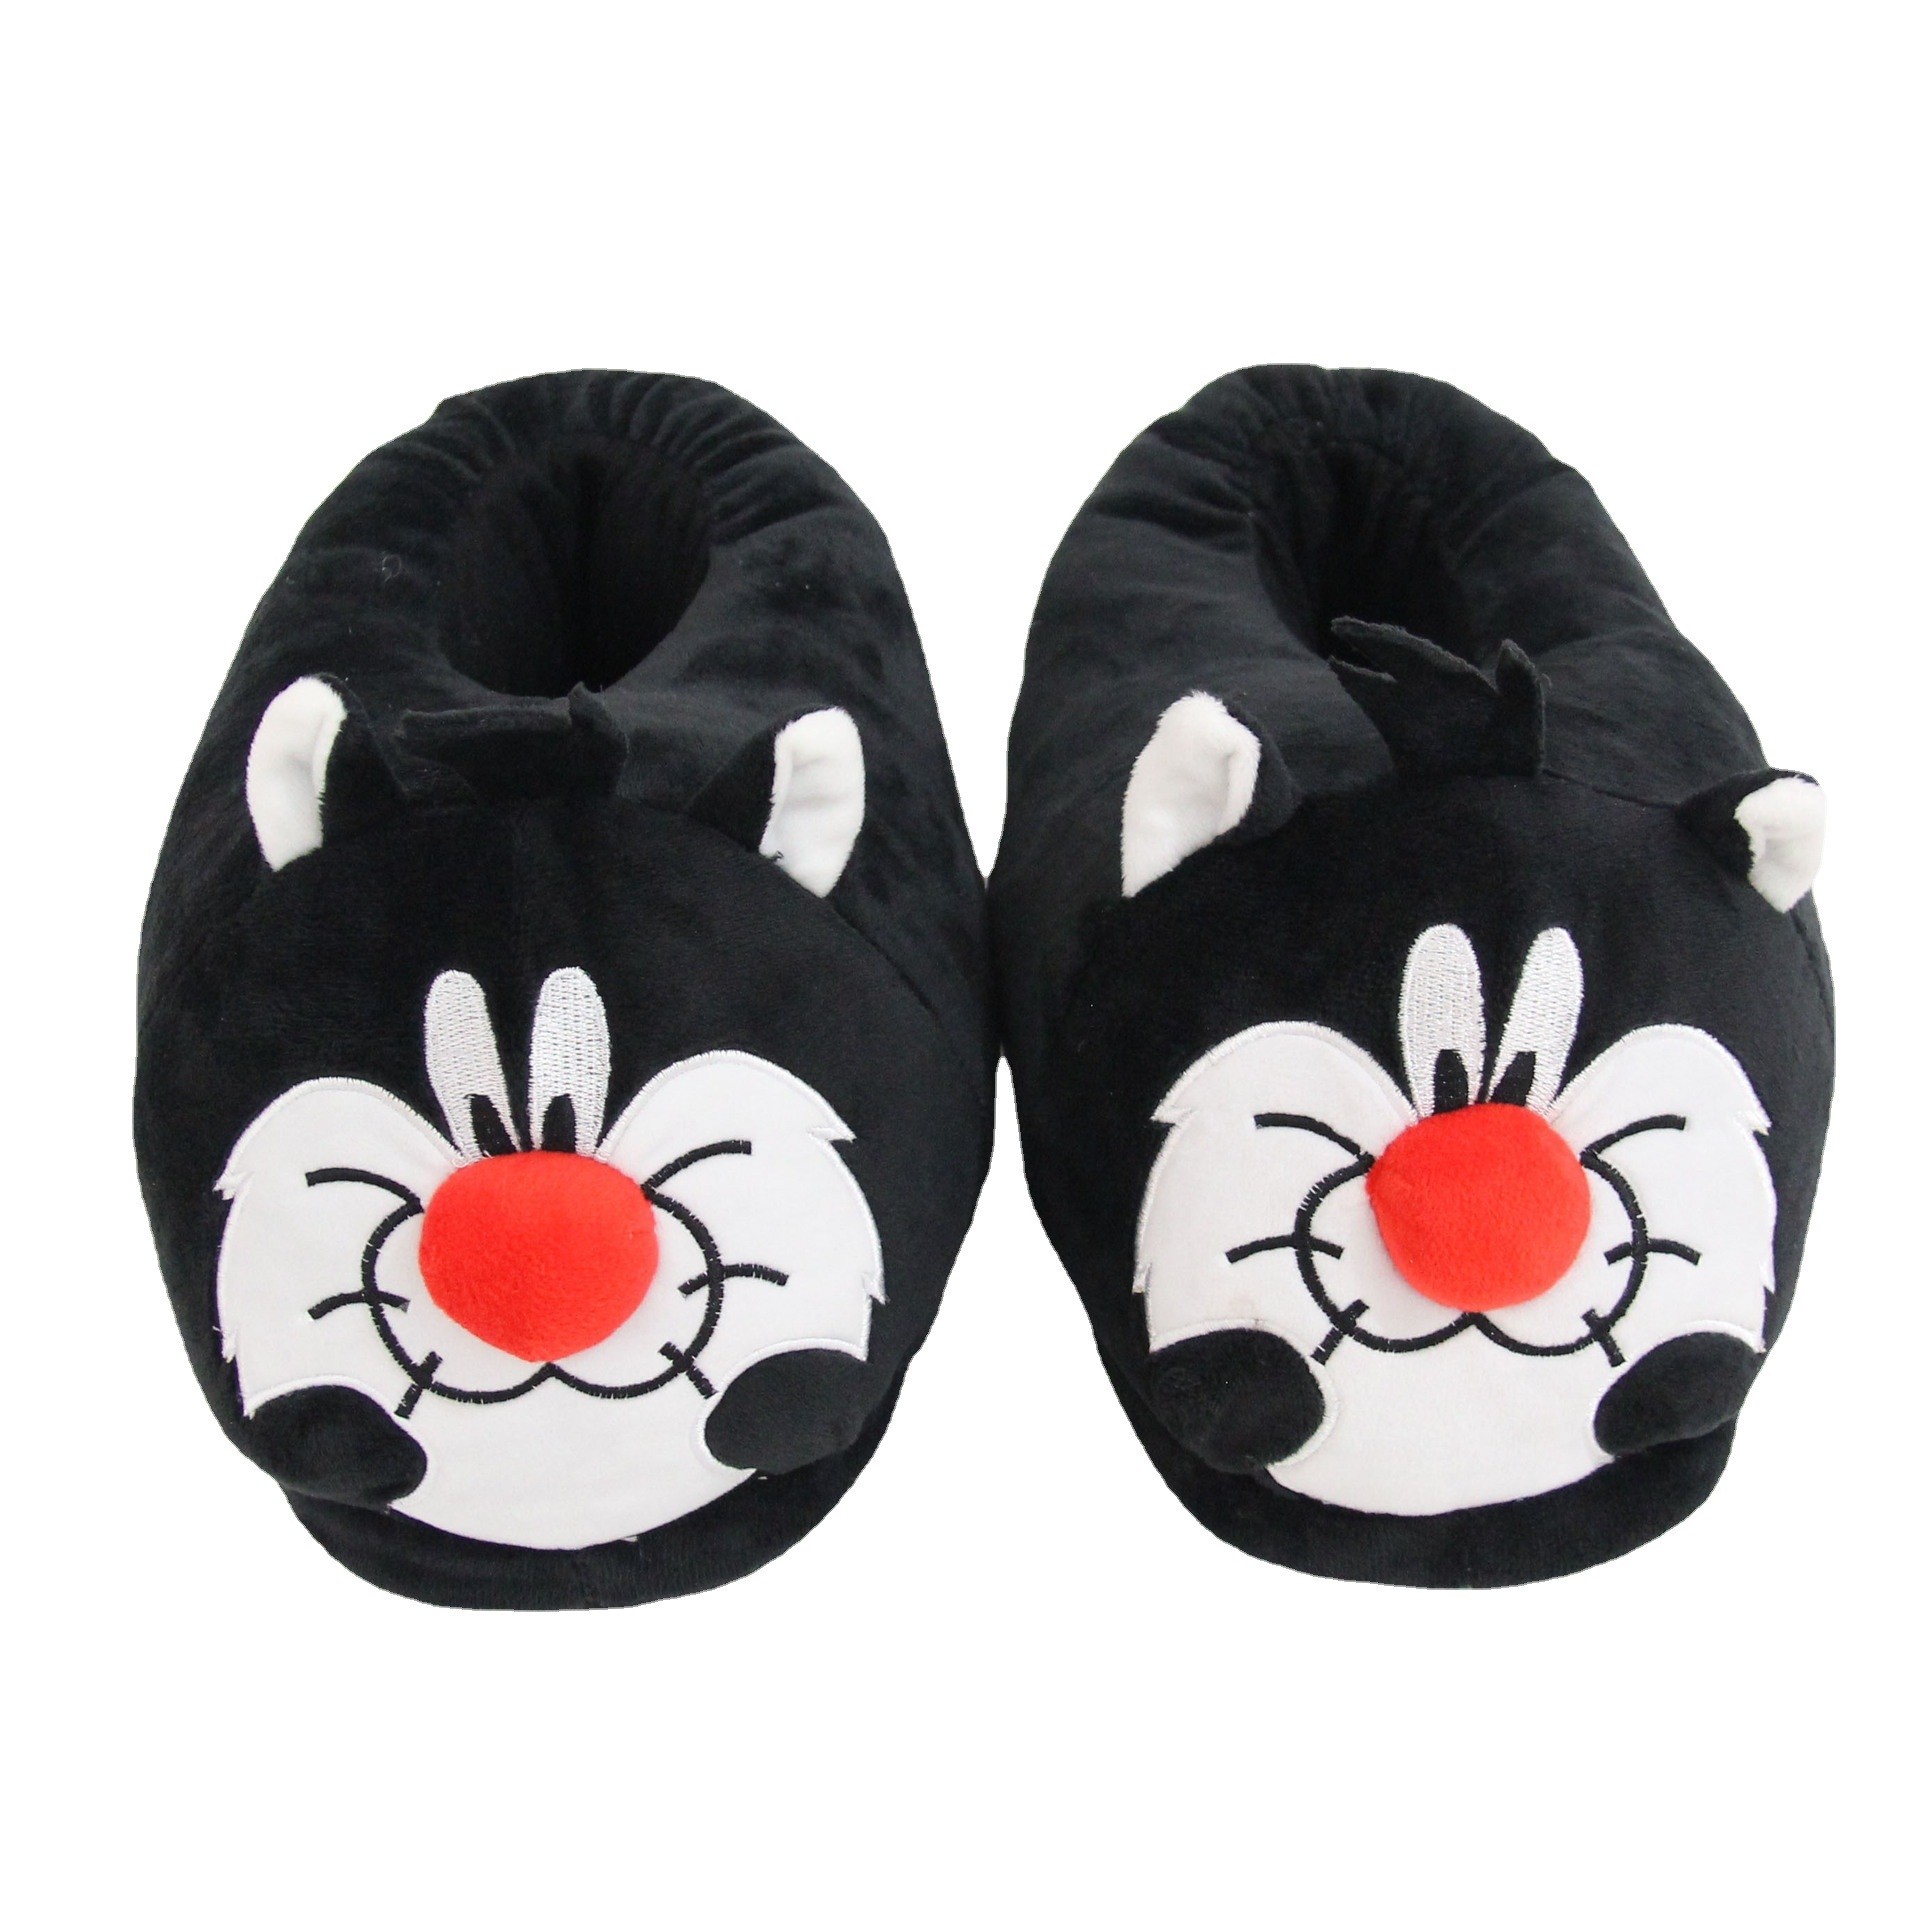 Tom Cat Indoor Plush Stuffed Leisure Slippers Shoes For Women & Men